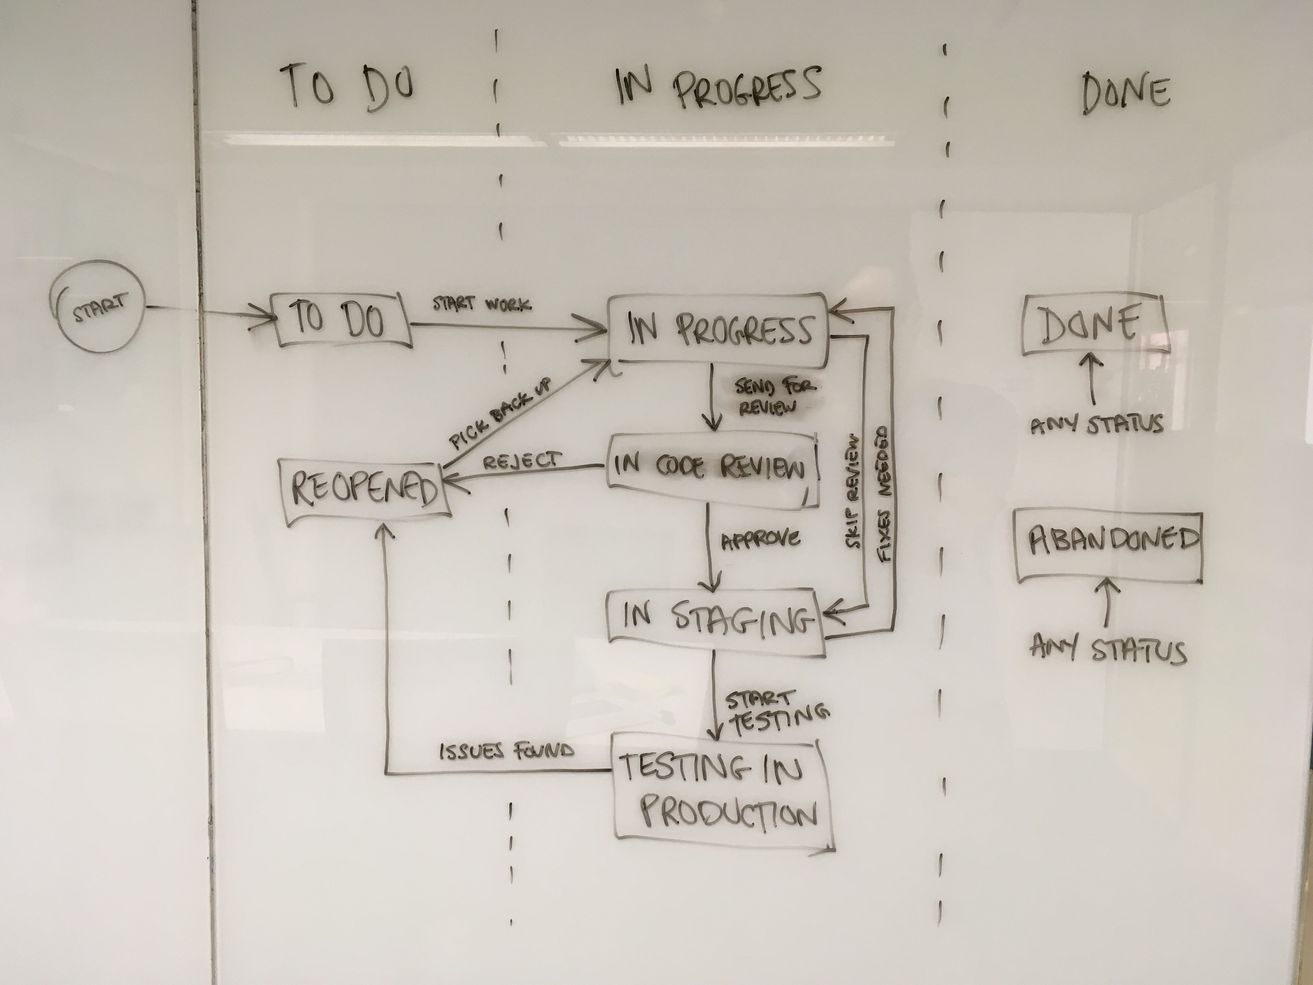 A team’s workflow mapped on a whiteboard, with statuses shown as boxes and transitions shown as arrows. 